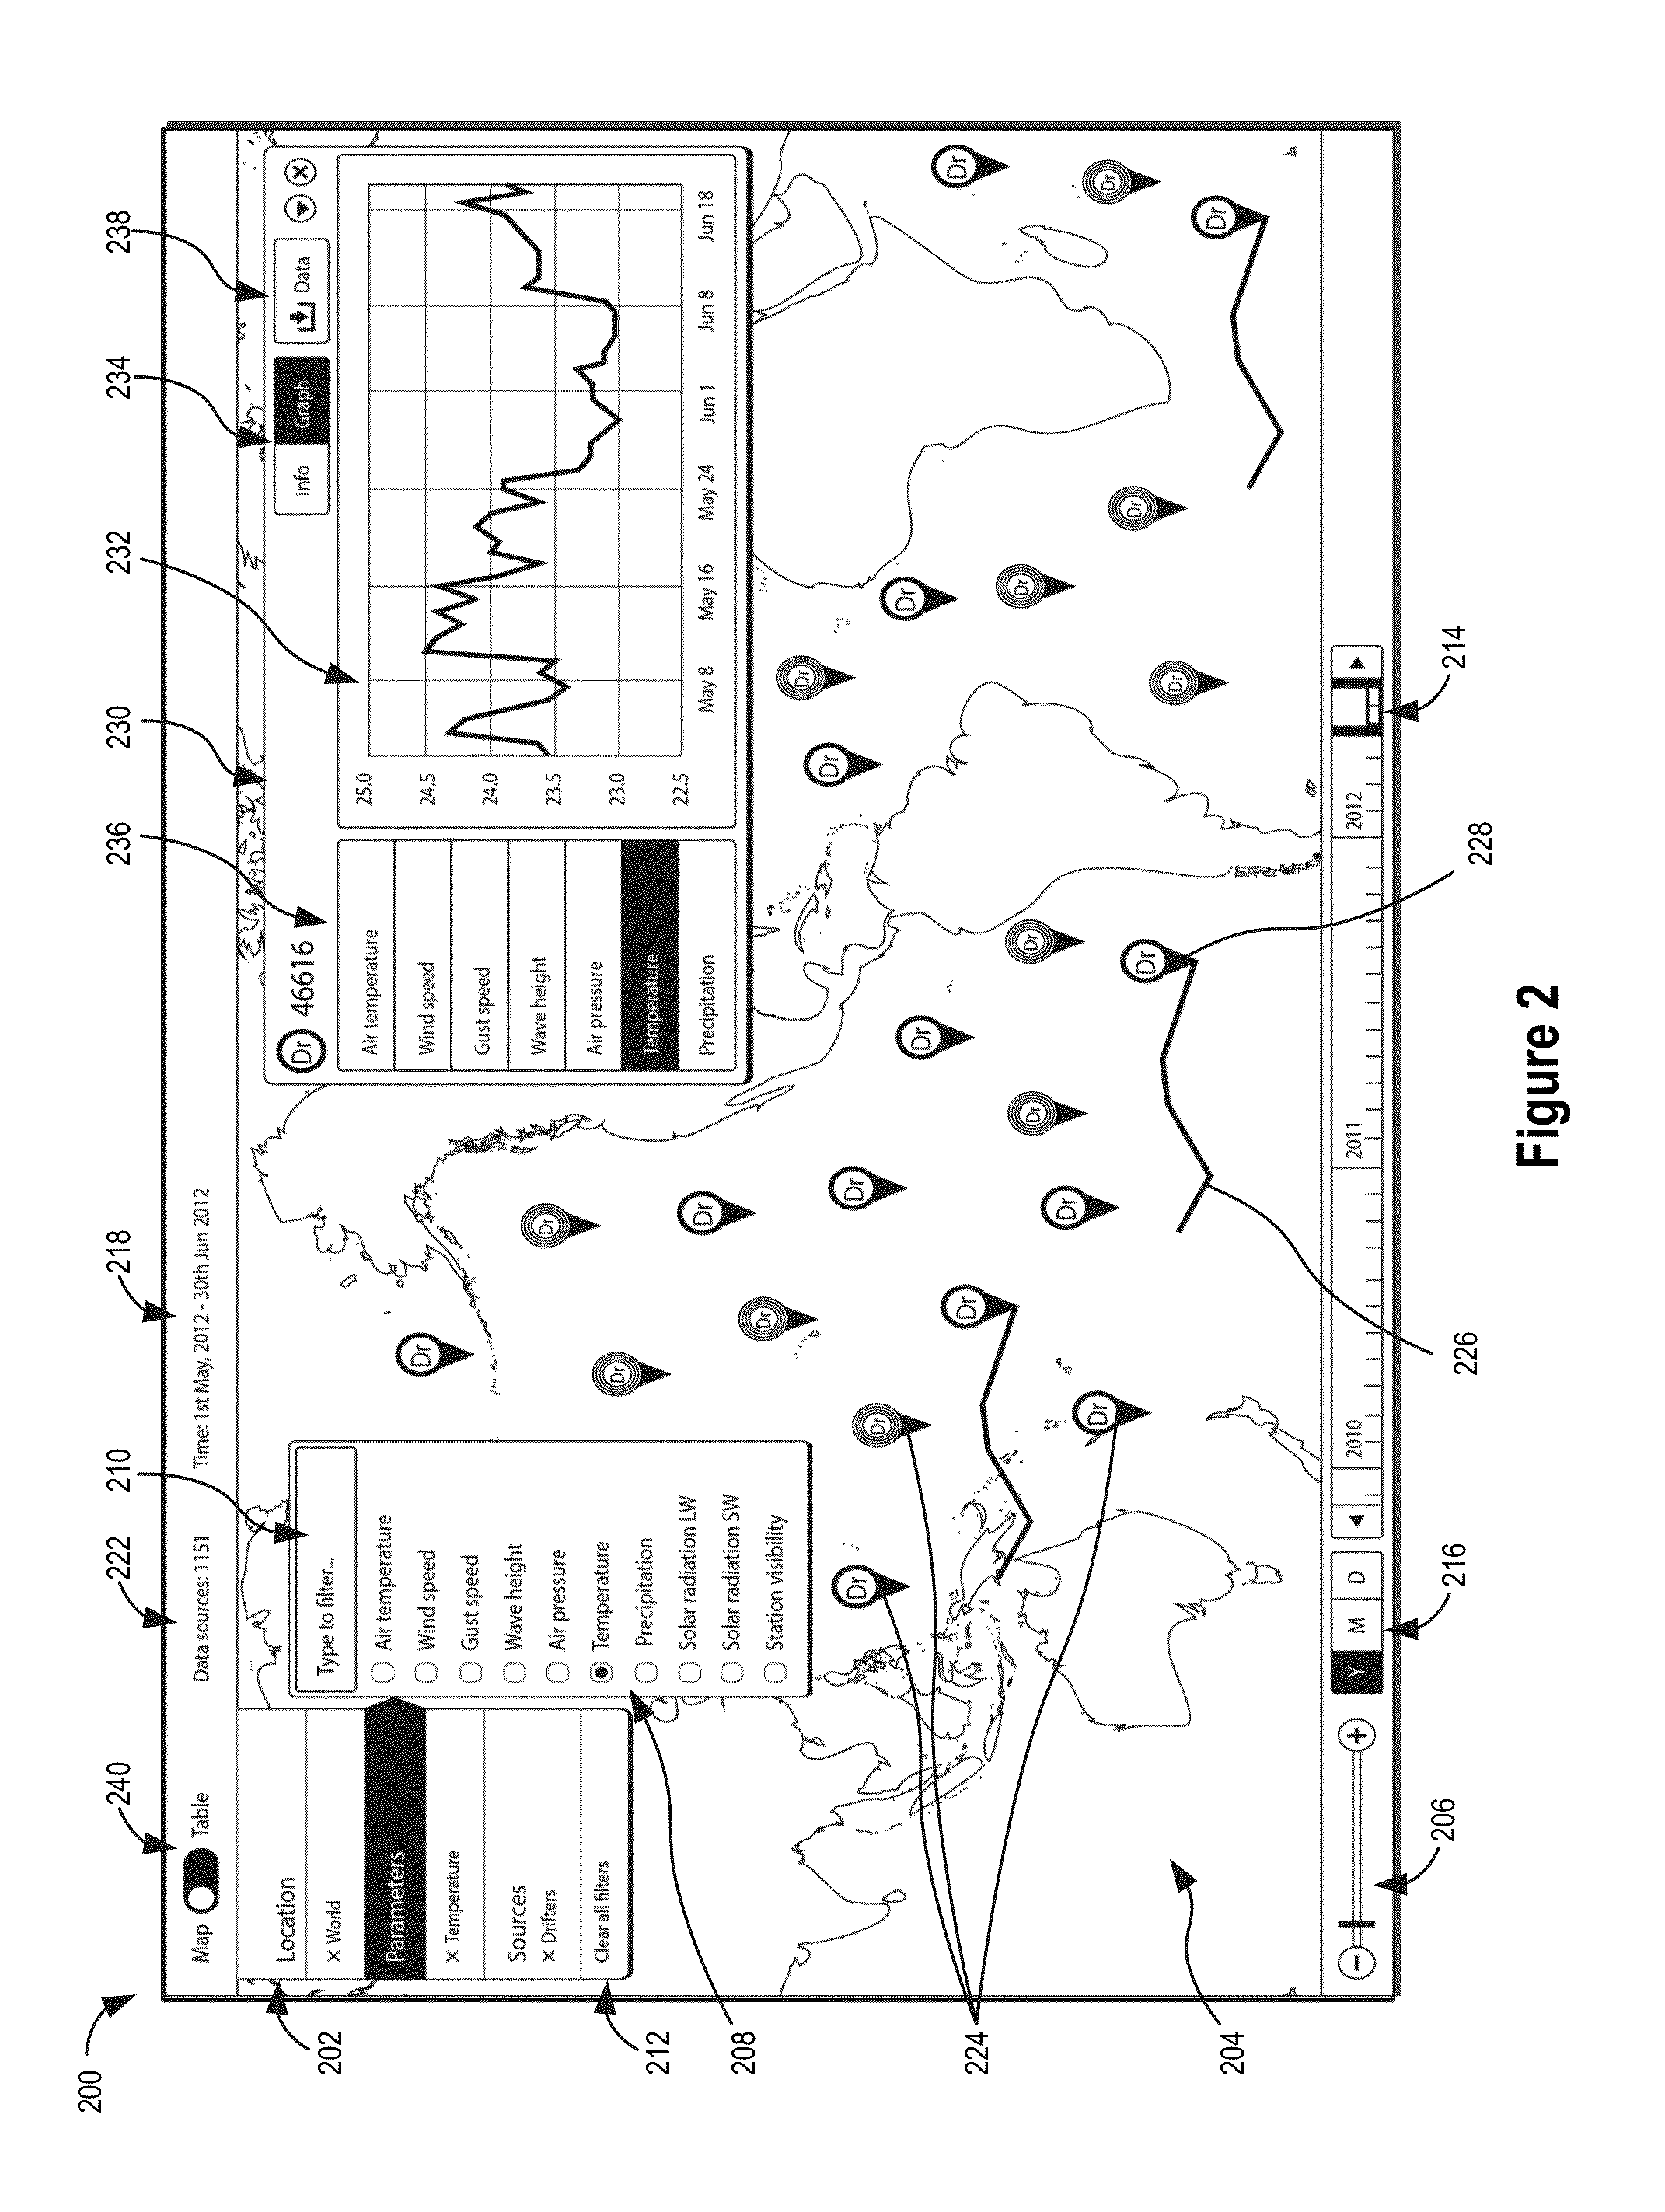 Systems and methods for interacting with spatio-temporal information